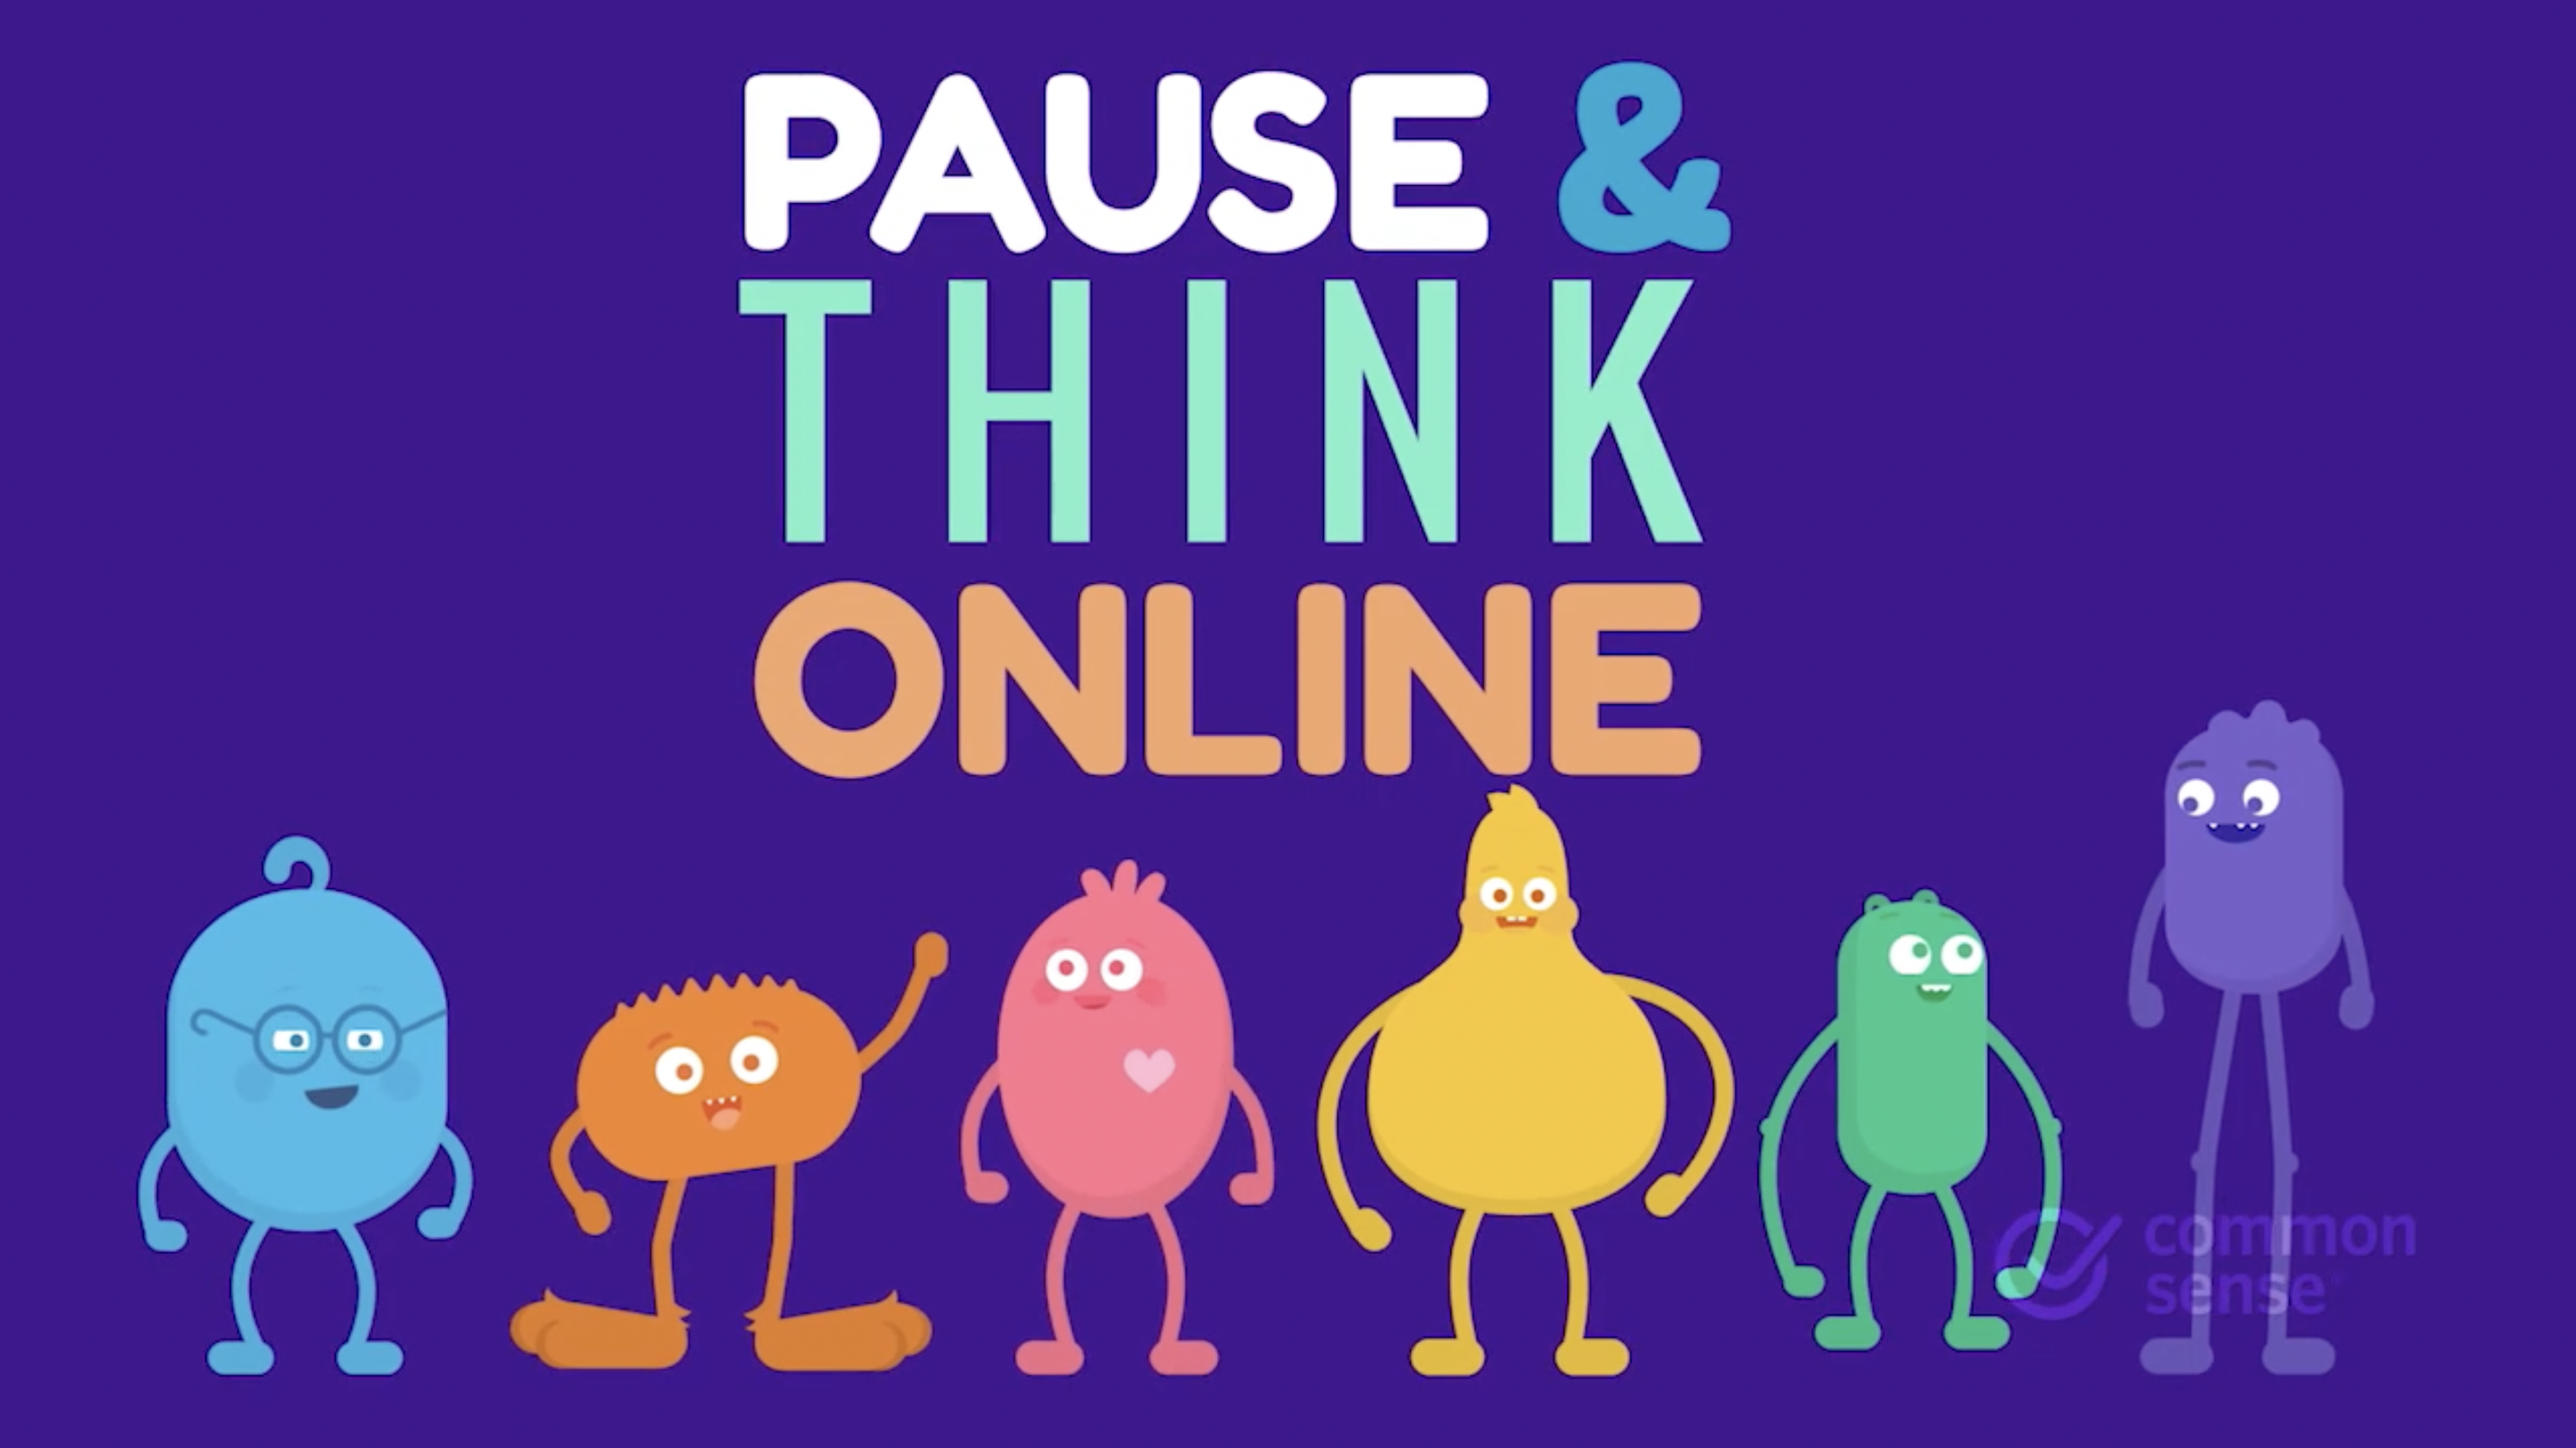 Pause & Think Online